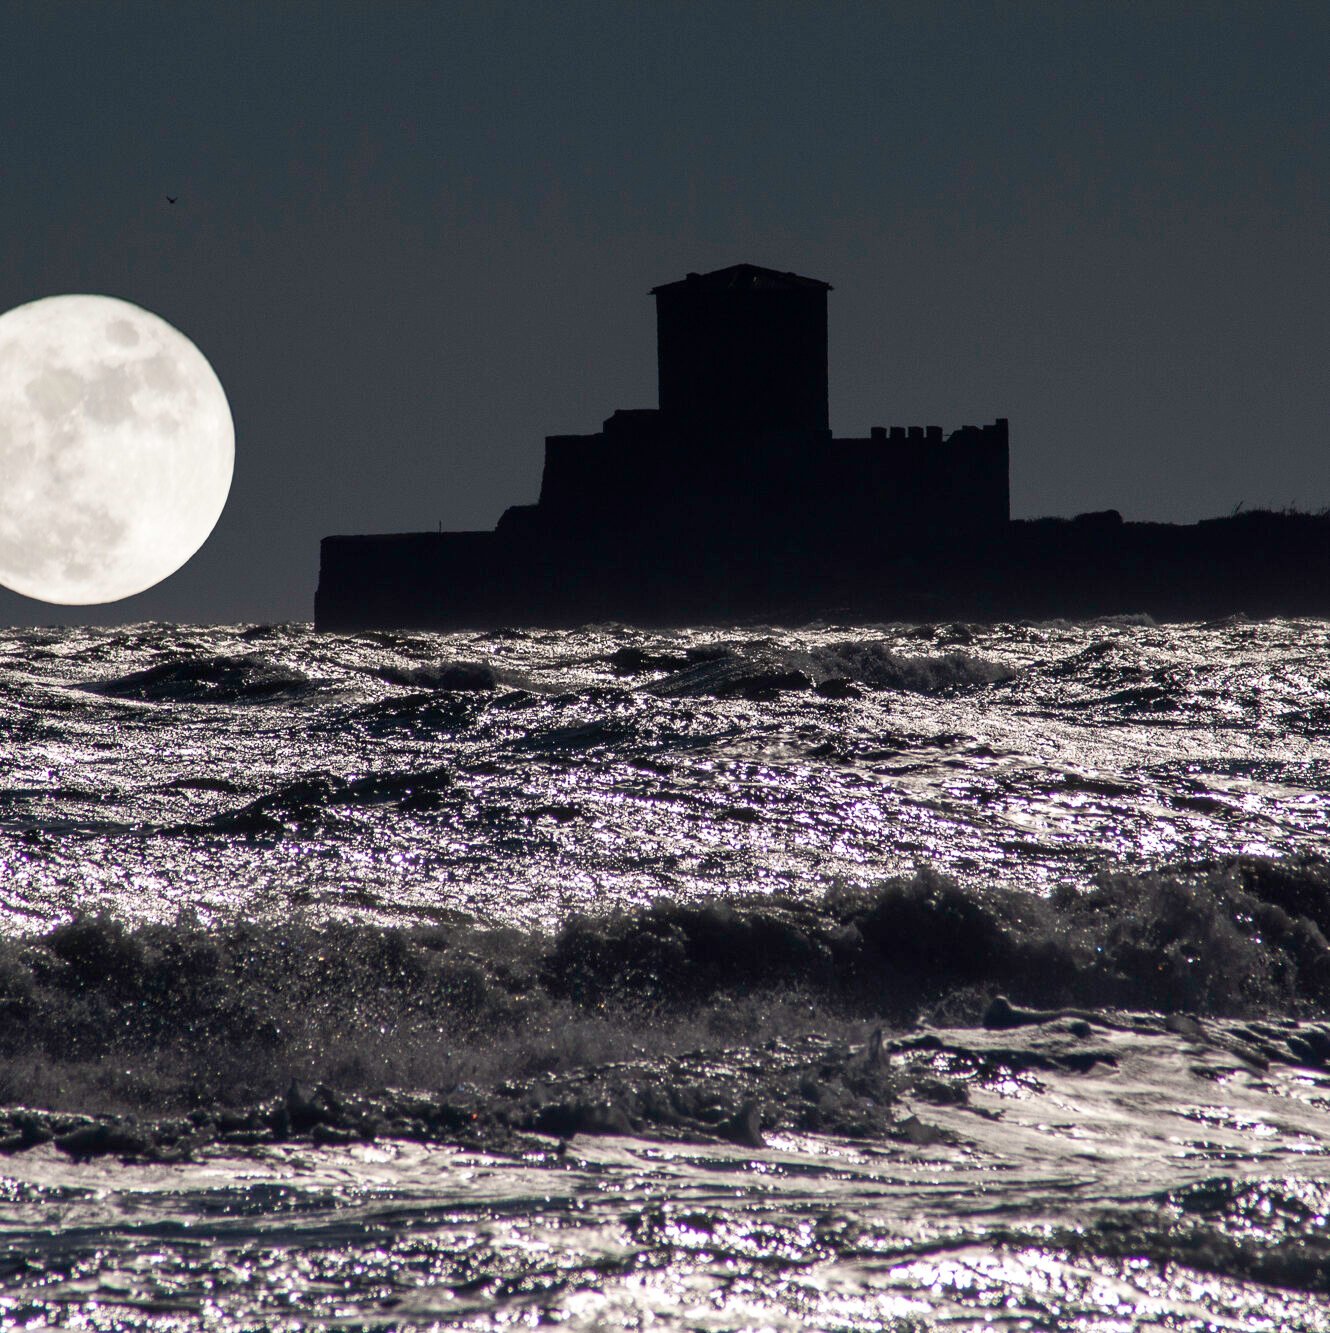 night sea with fortress moon and moonlight reflections on waves